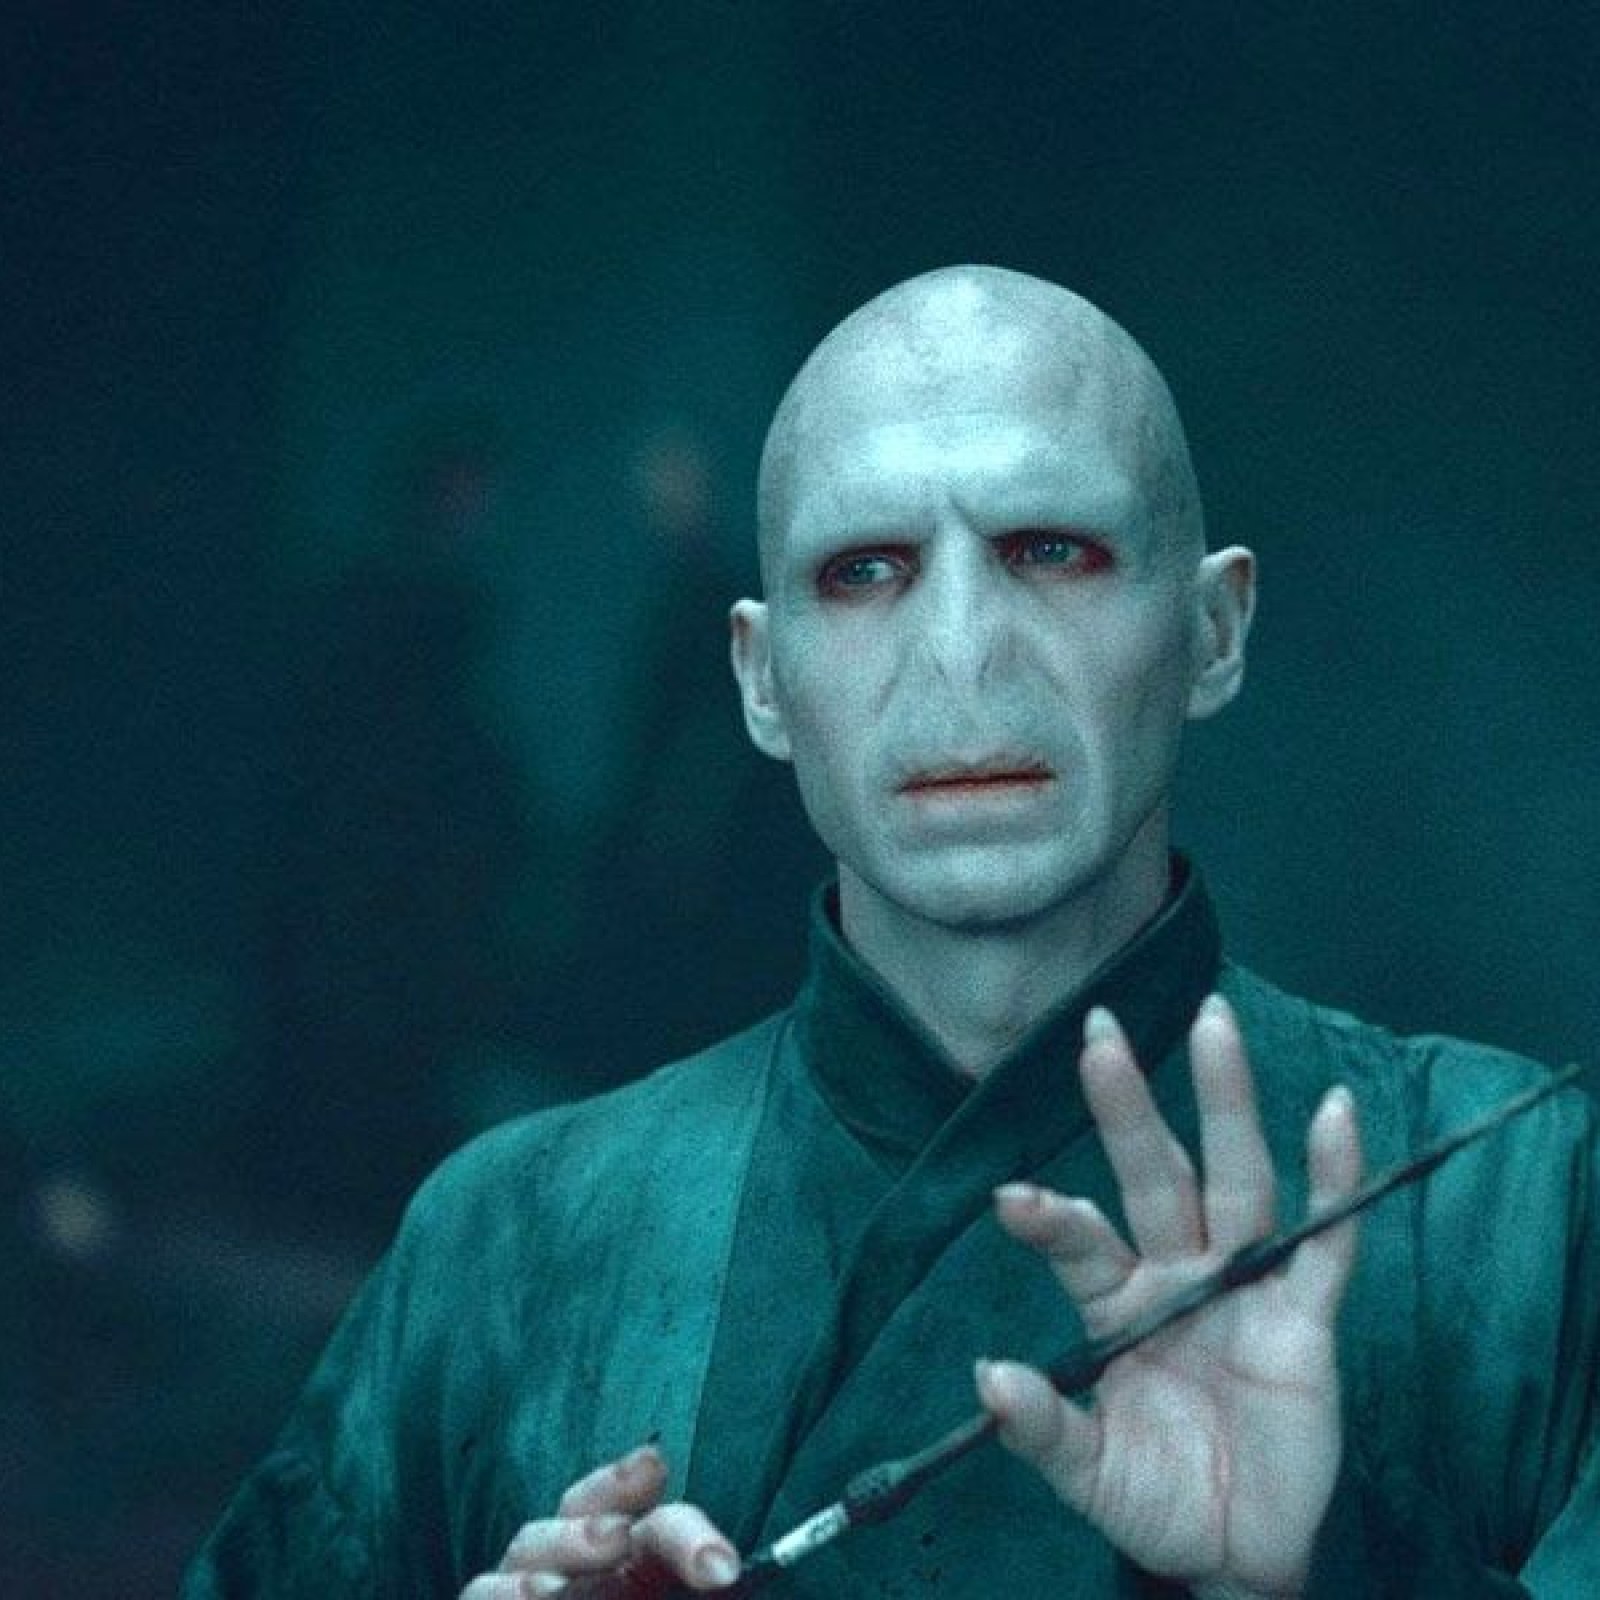 What It S Like To Share A Name With Lord Voldemort From Harry Potter